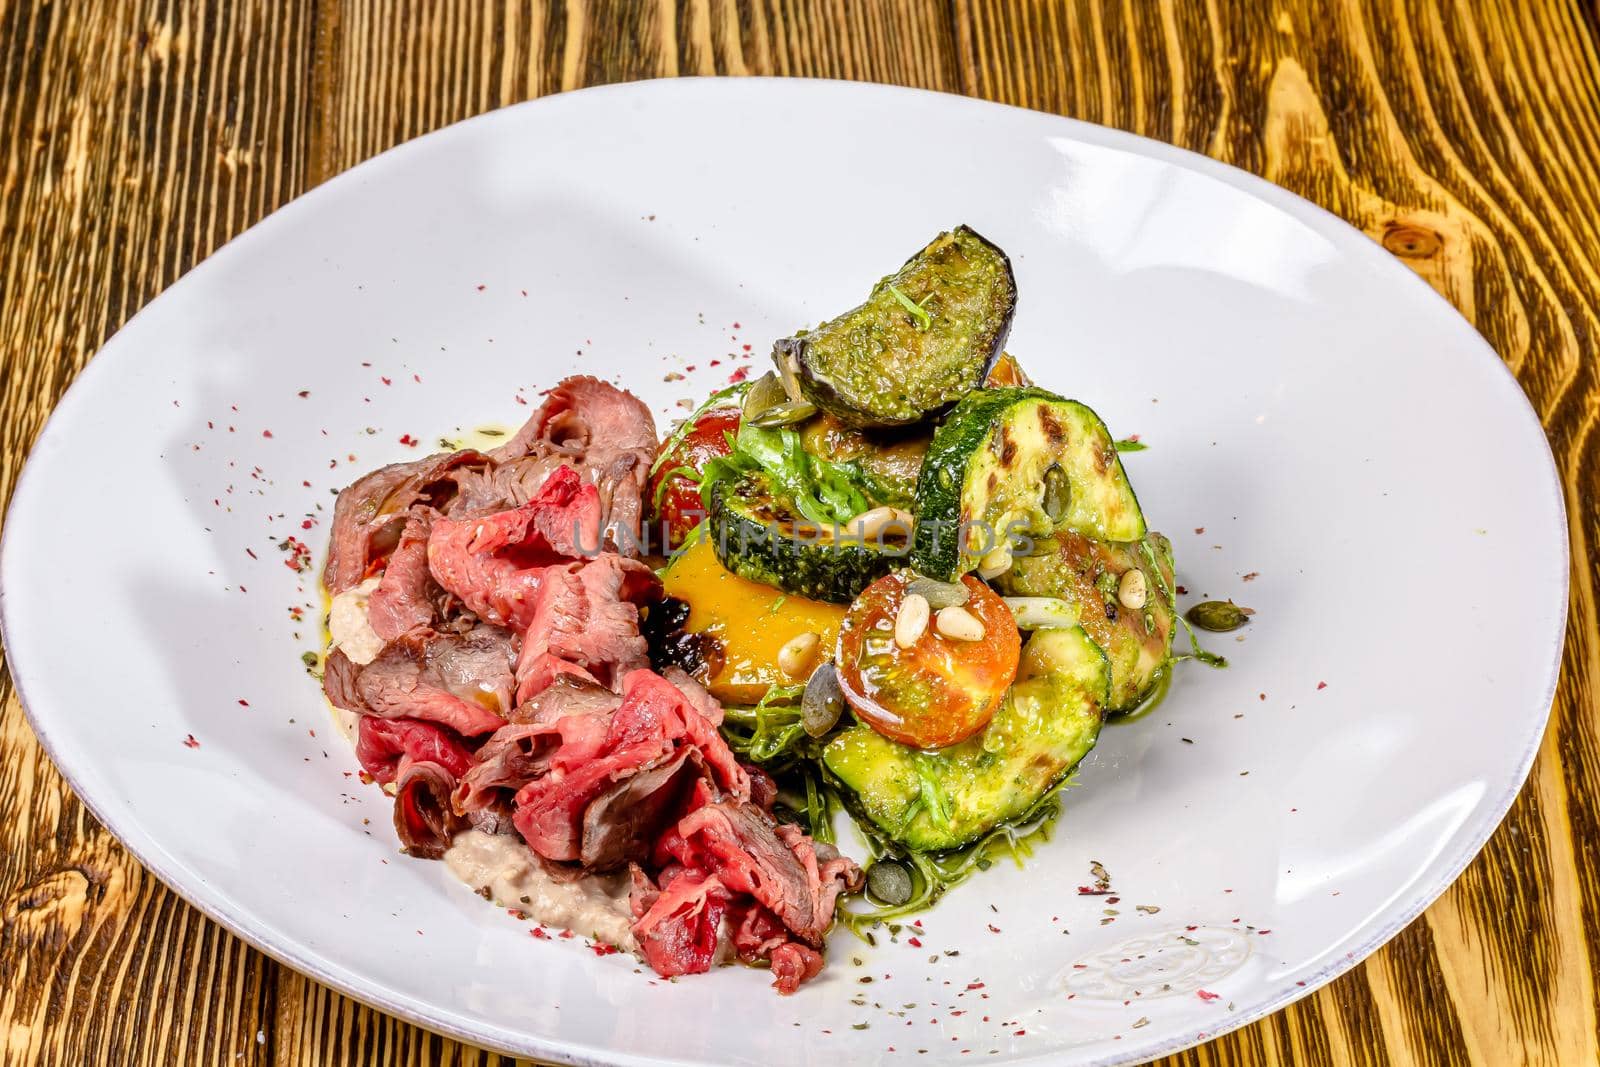 Sliced rare roast sirloin of beef with roasted vegetables on rustic wooden background.